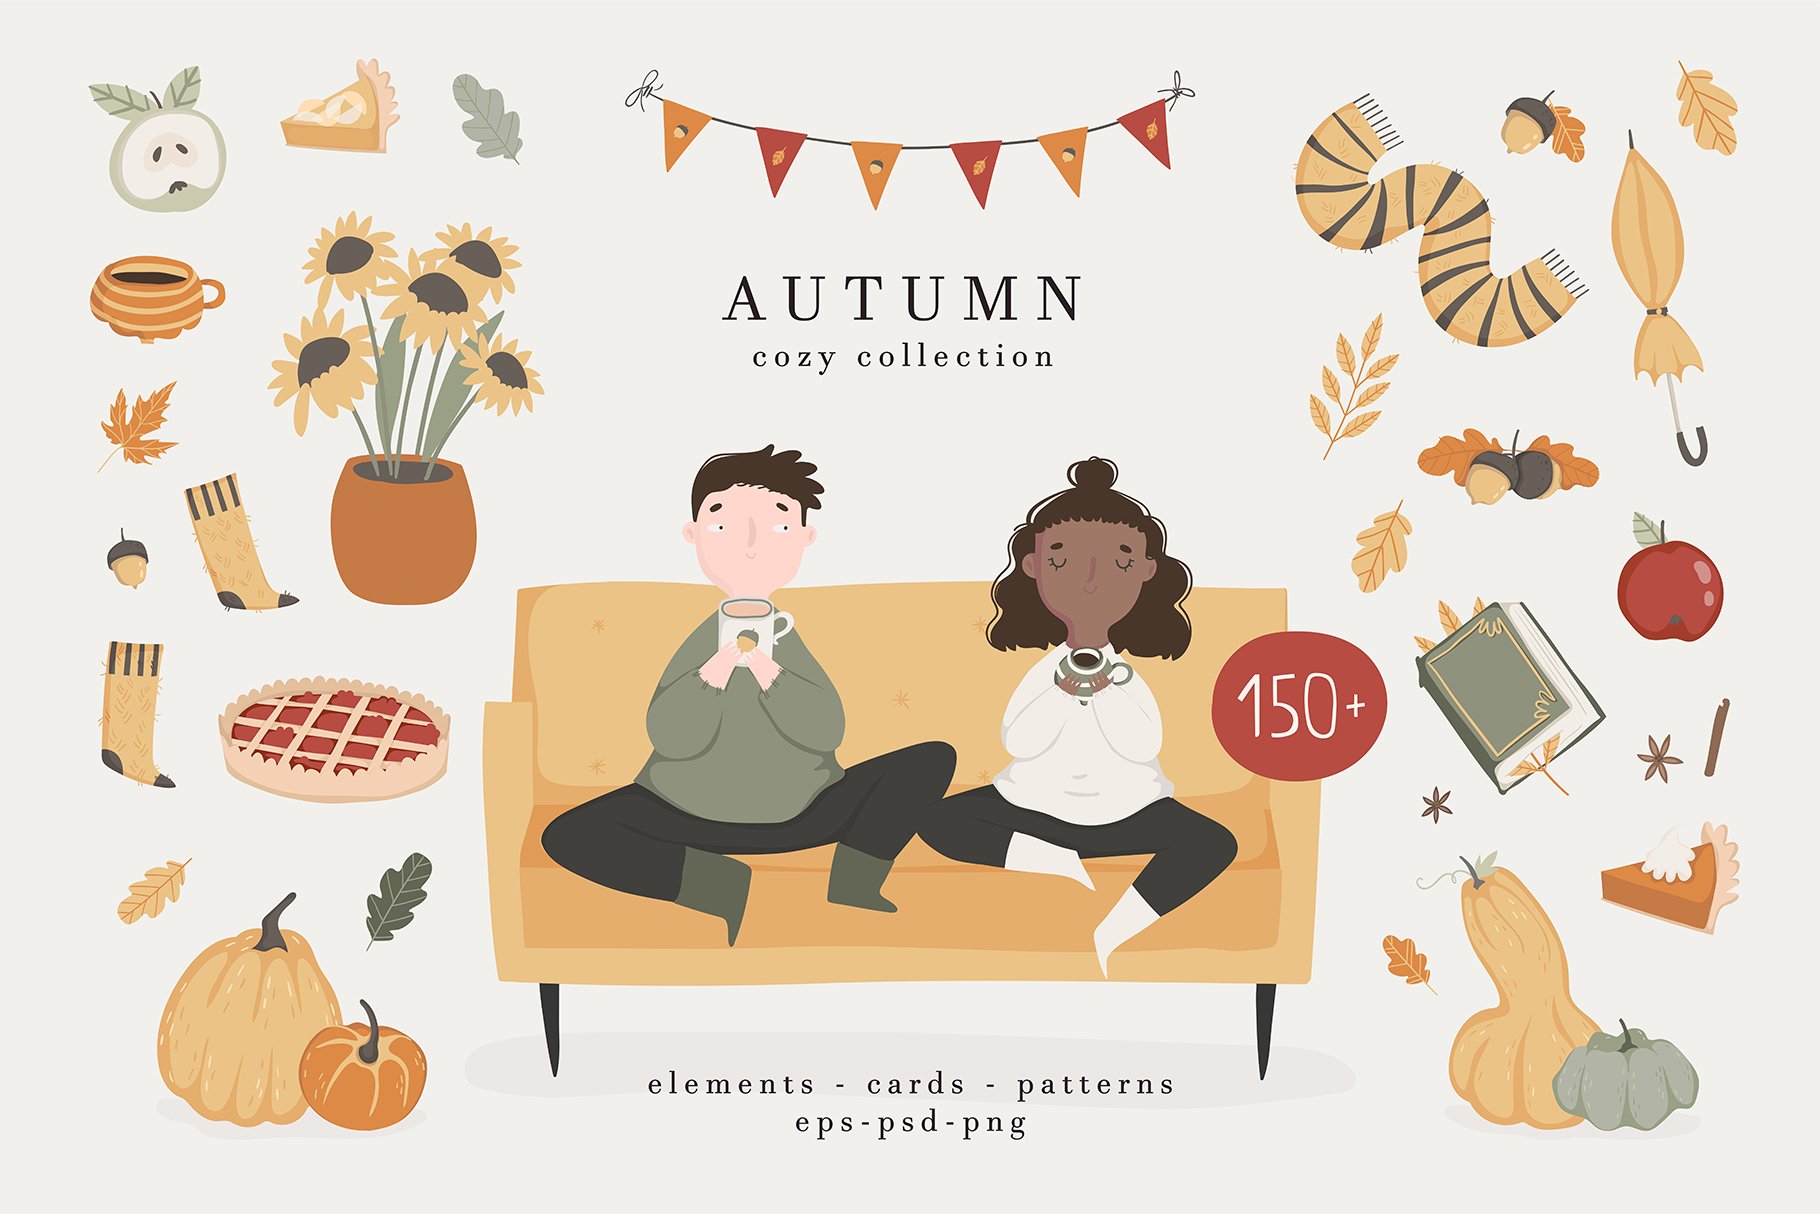 Autumn cozy collection: card creator cover image.